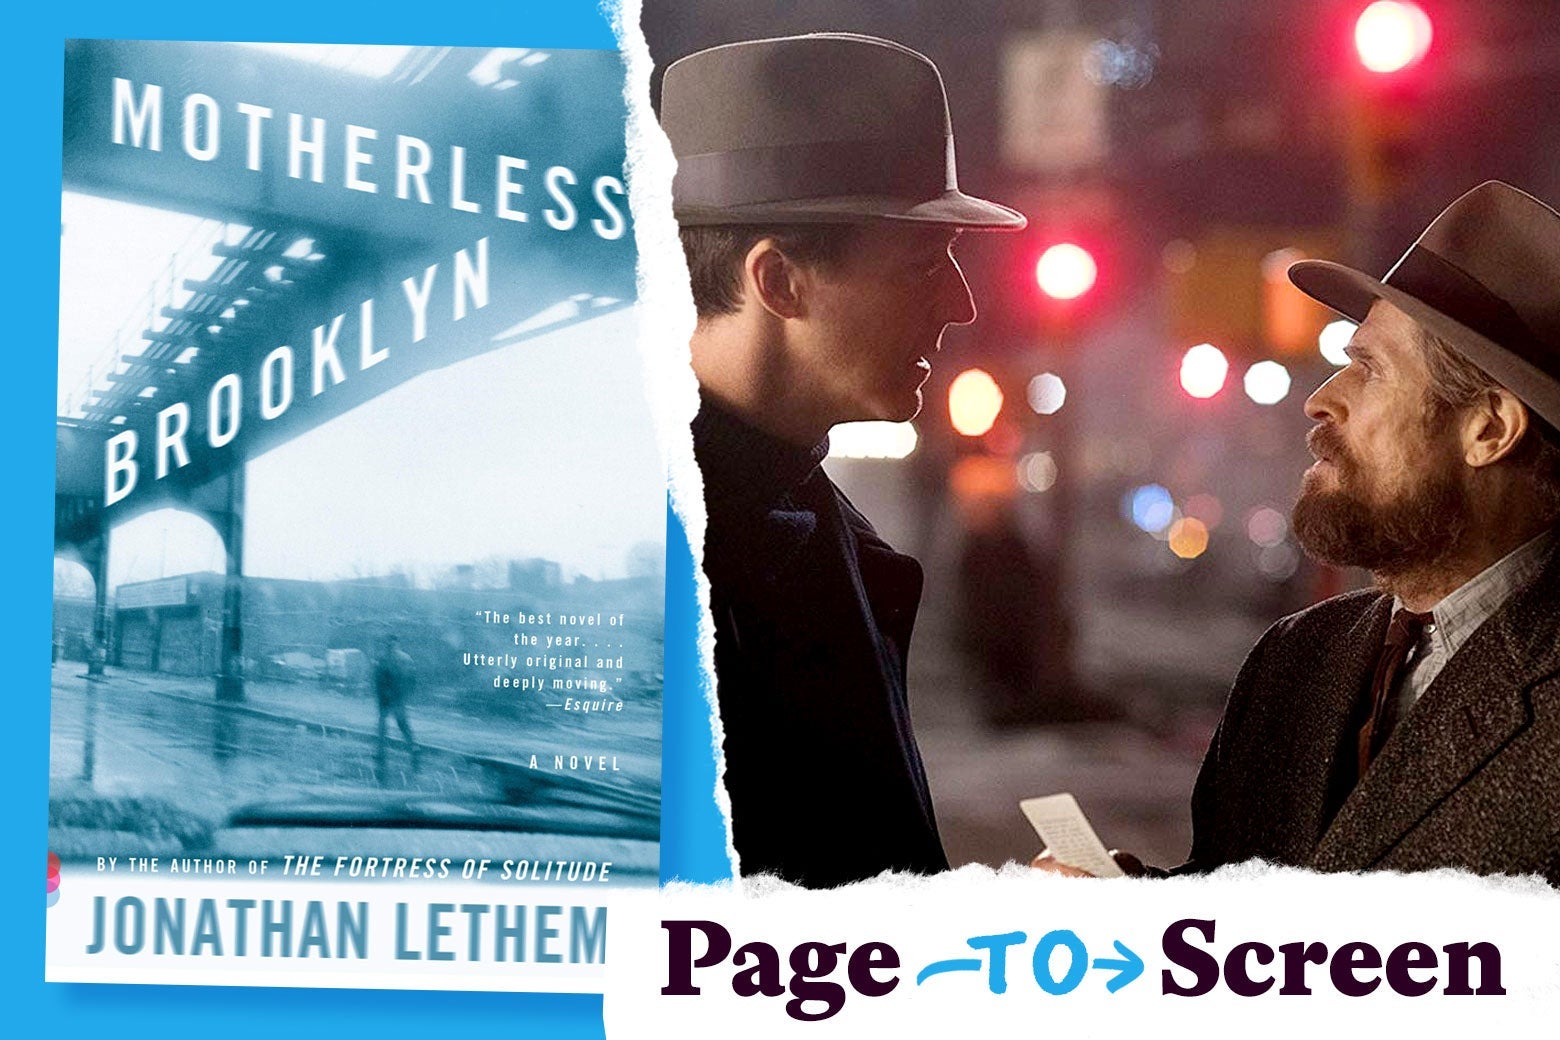 The book cover of Motherless Brooklyn, and a scene from its movie.